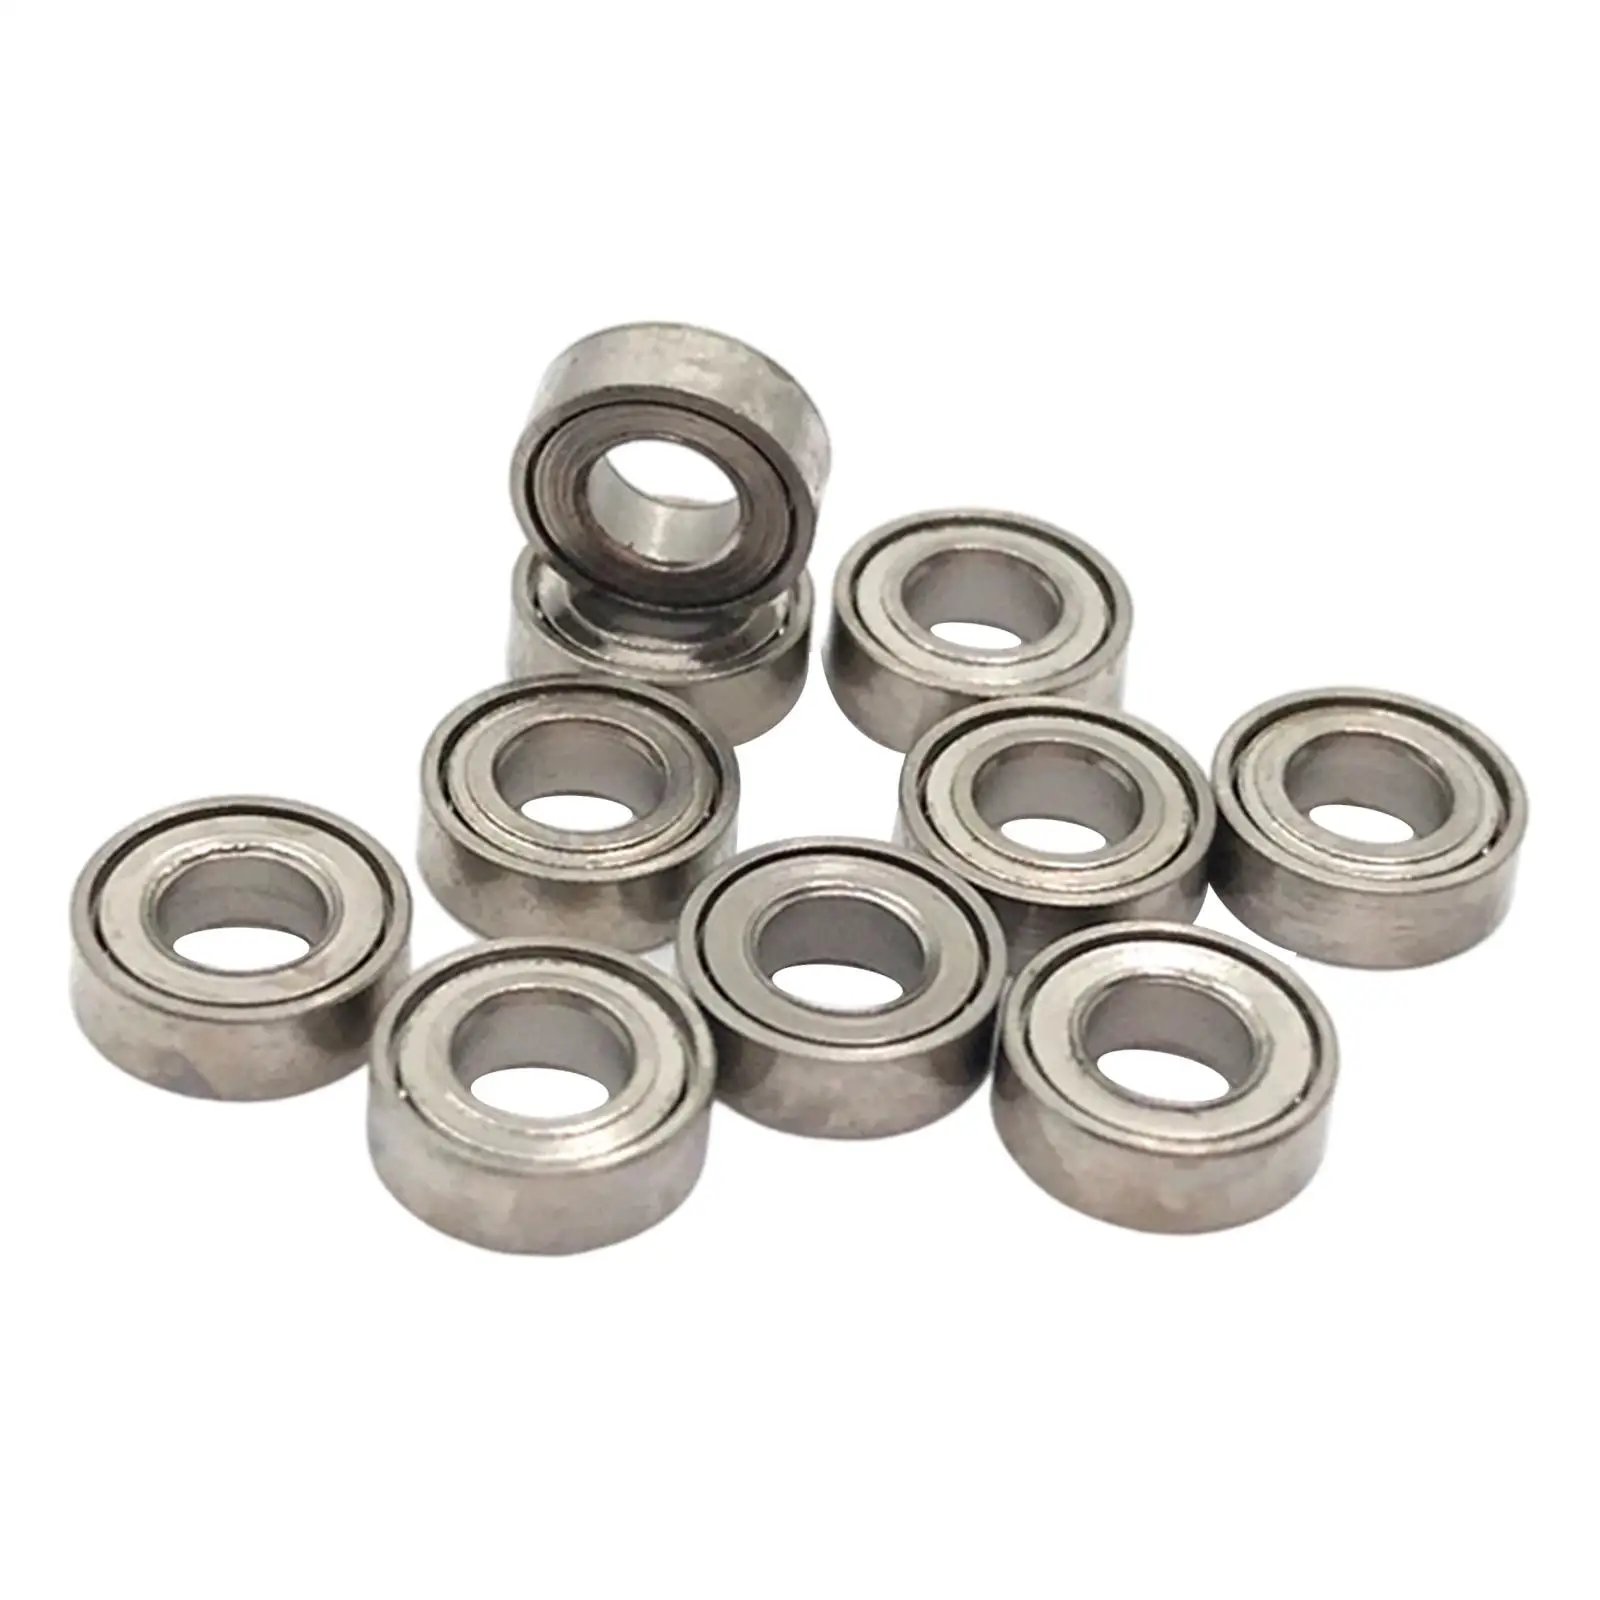 10x Metal 3x6x2mm Bearing Spare Accessories for WPL D12 C14 C34 C44 Part